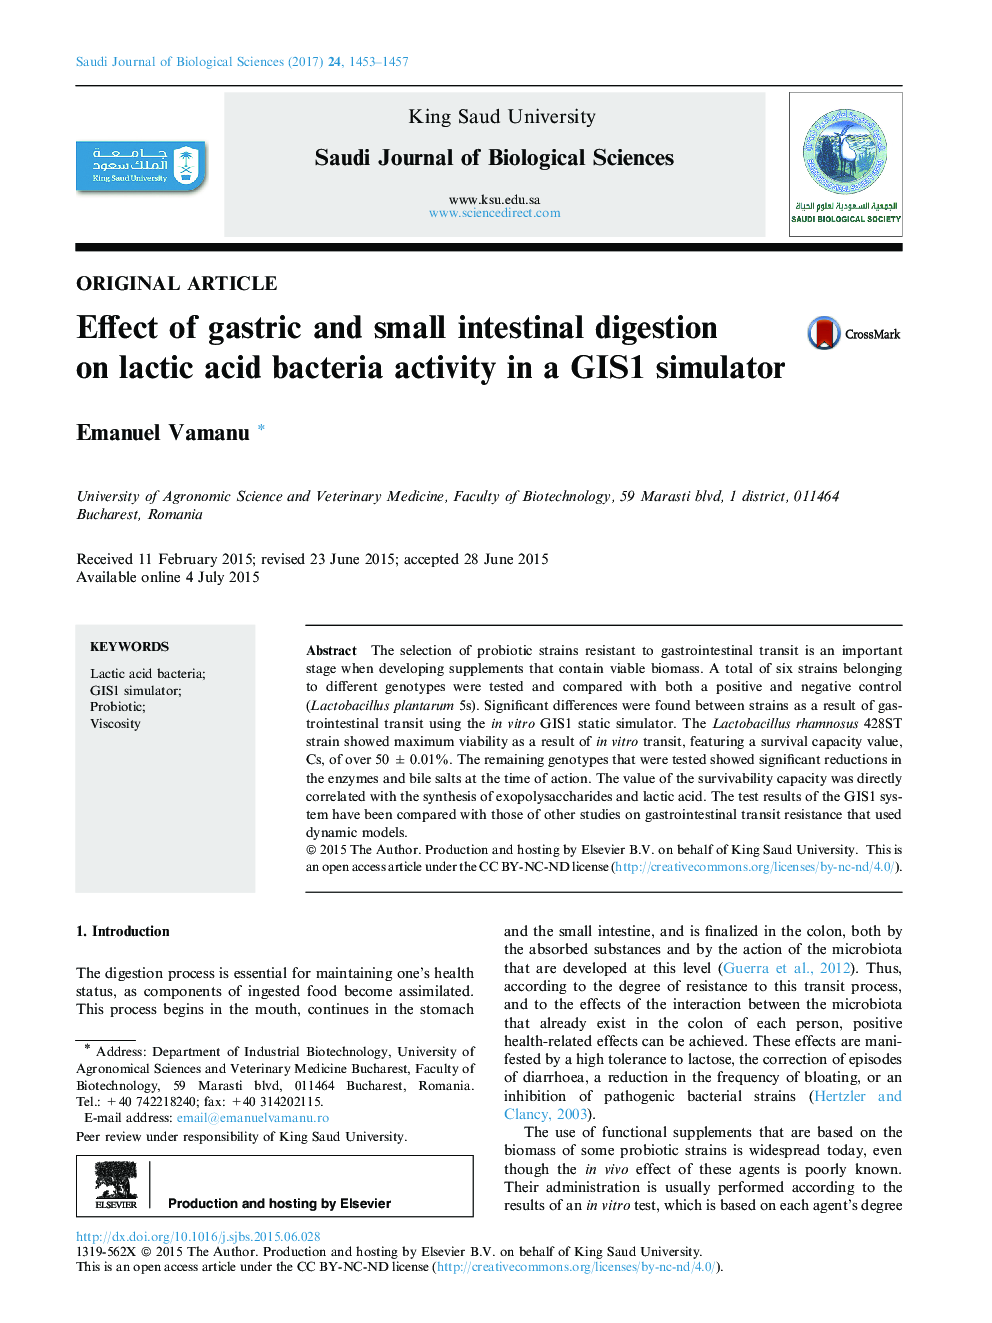 Original articleEffect of gastric and small intestinal digestion on lactic acid bacteria activity in a GIS1 simulator